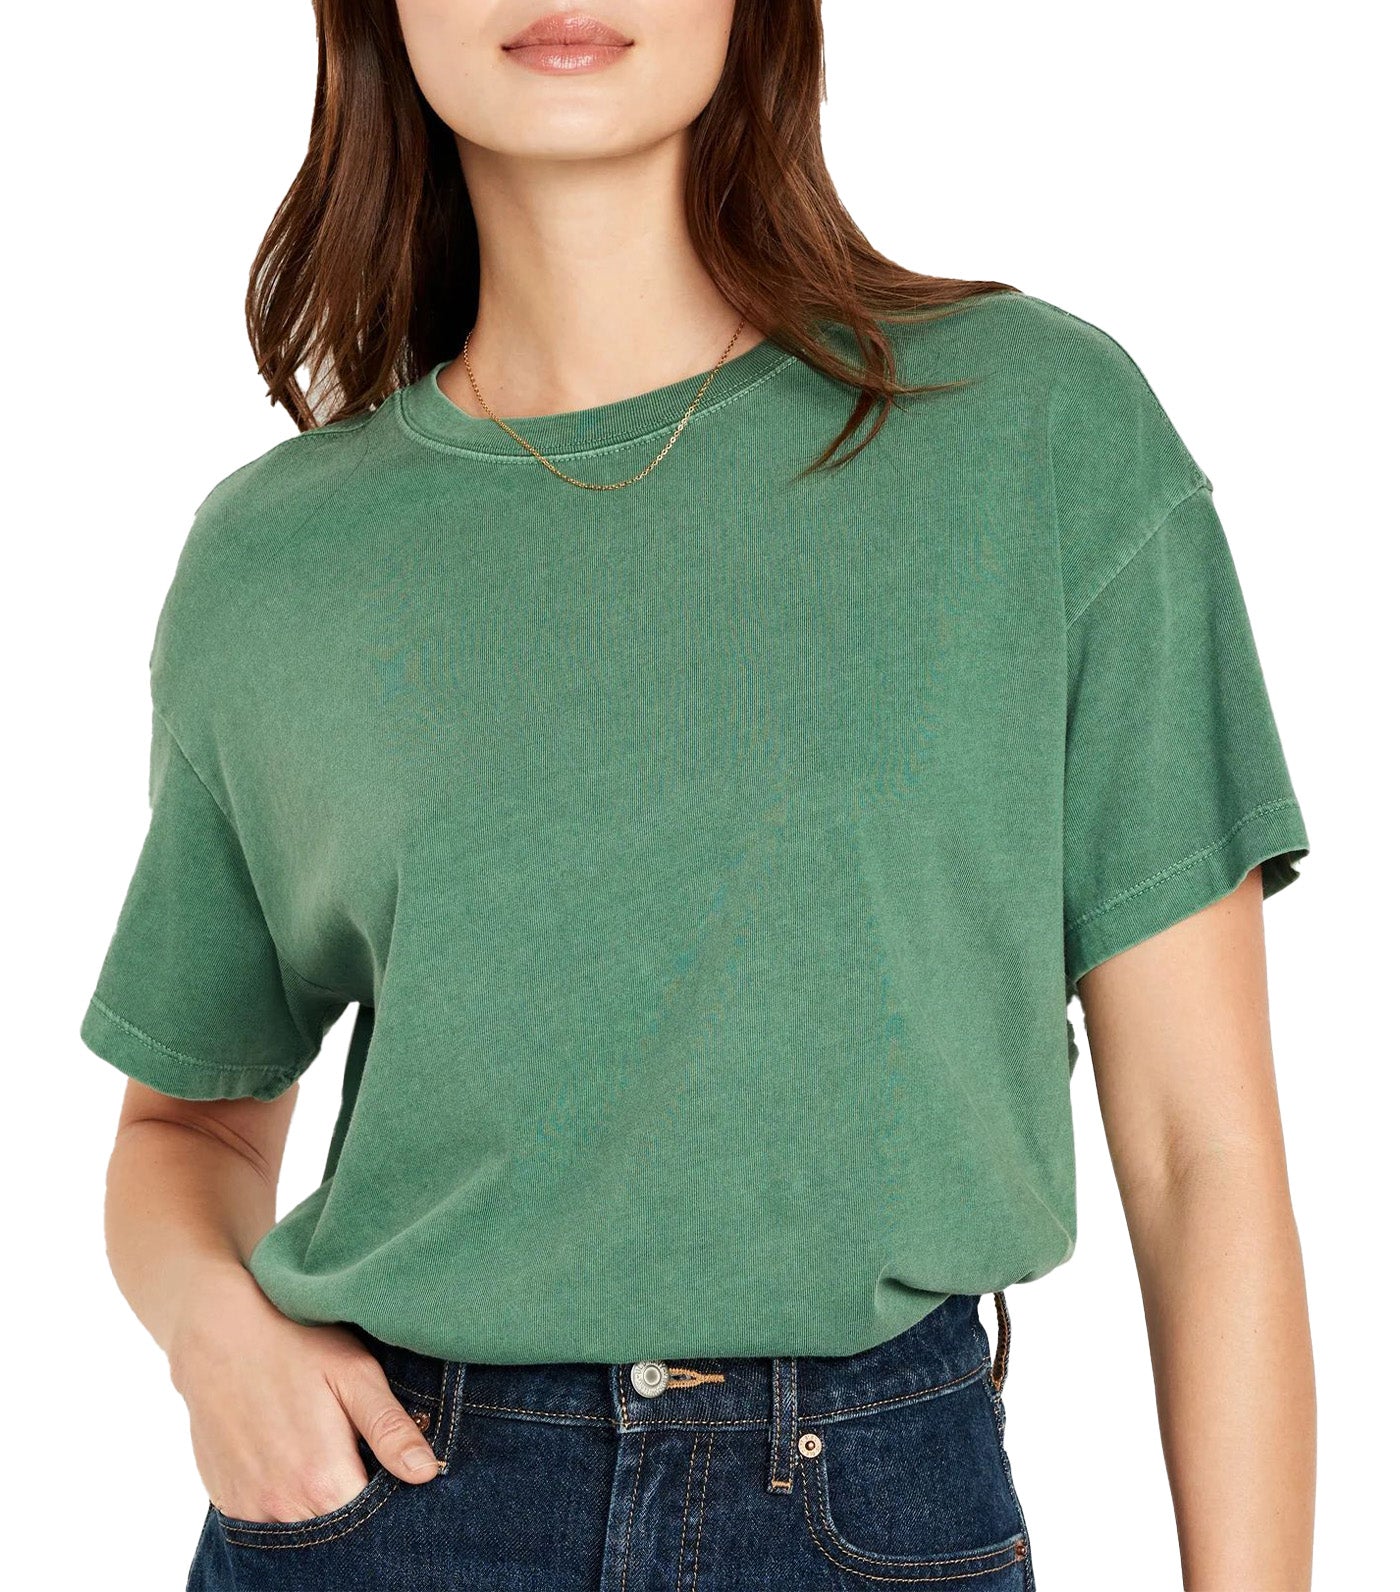 Vintage Crew-Neck T-Shirt for Women Field Of Greens